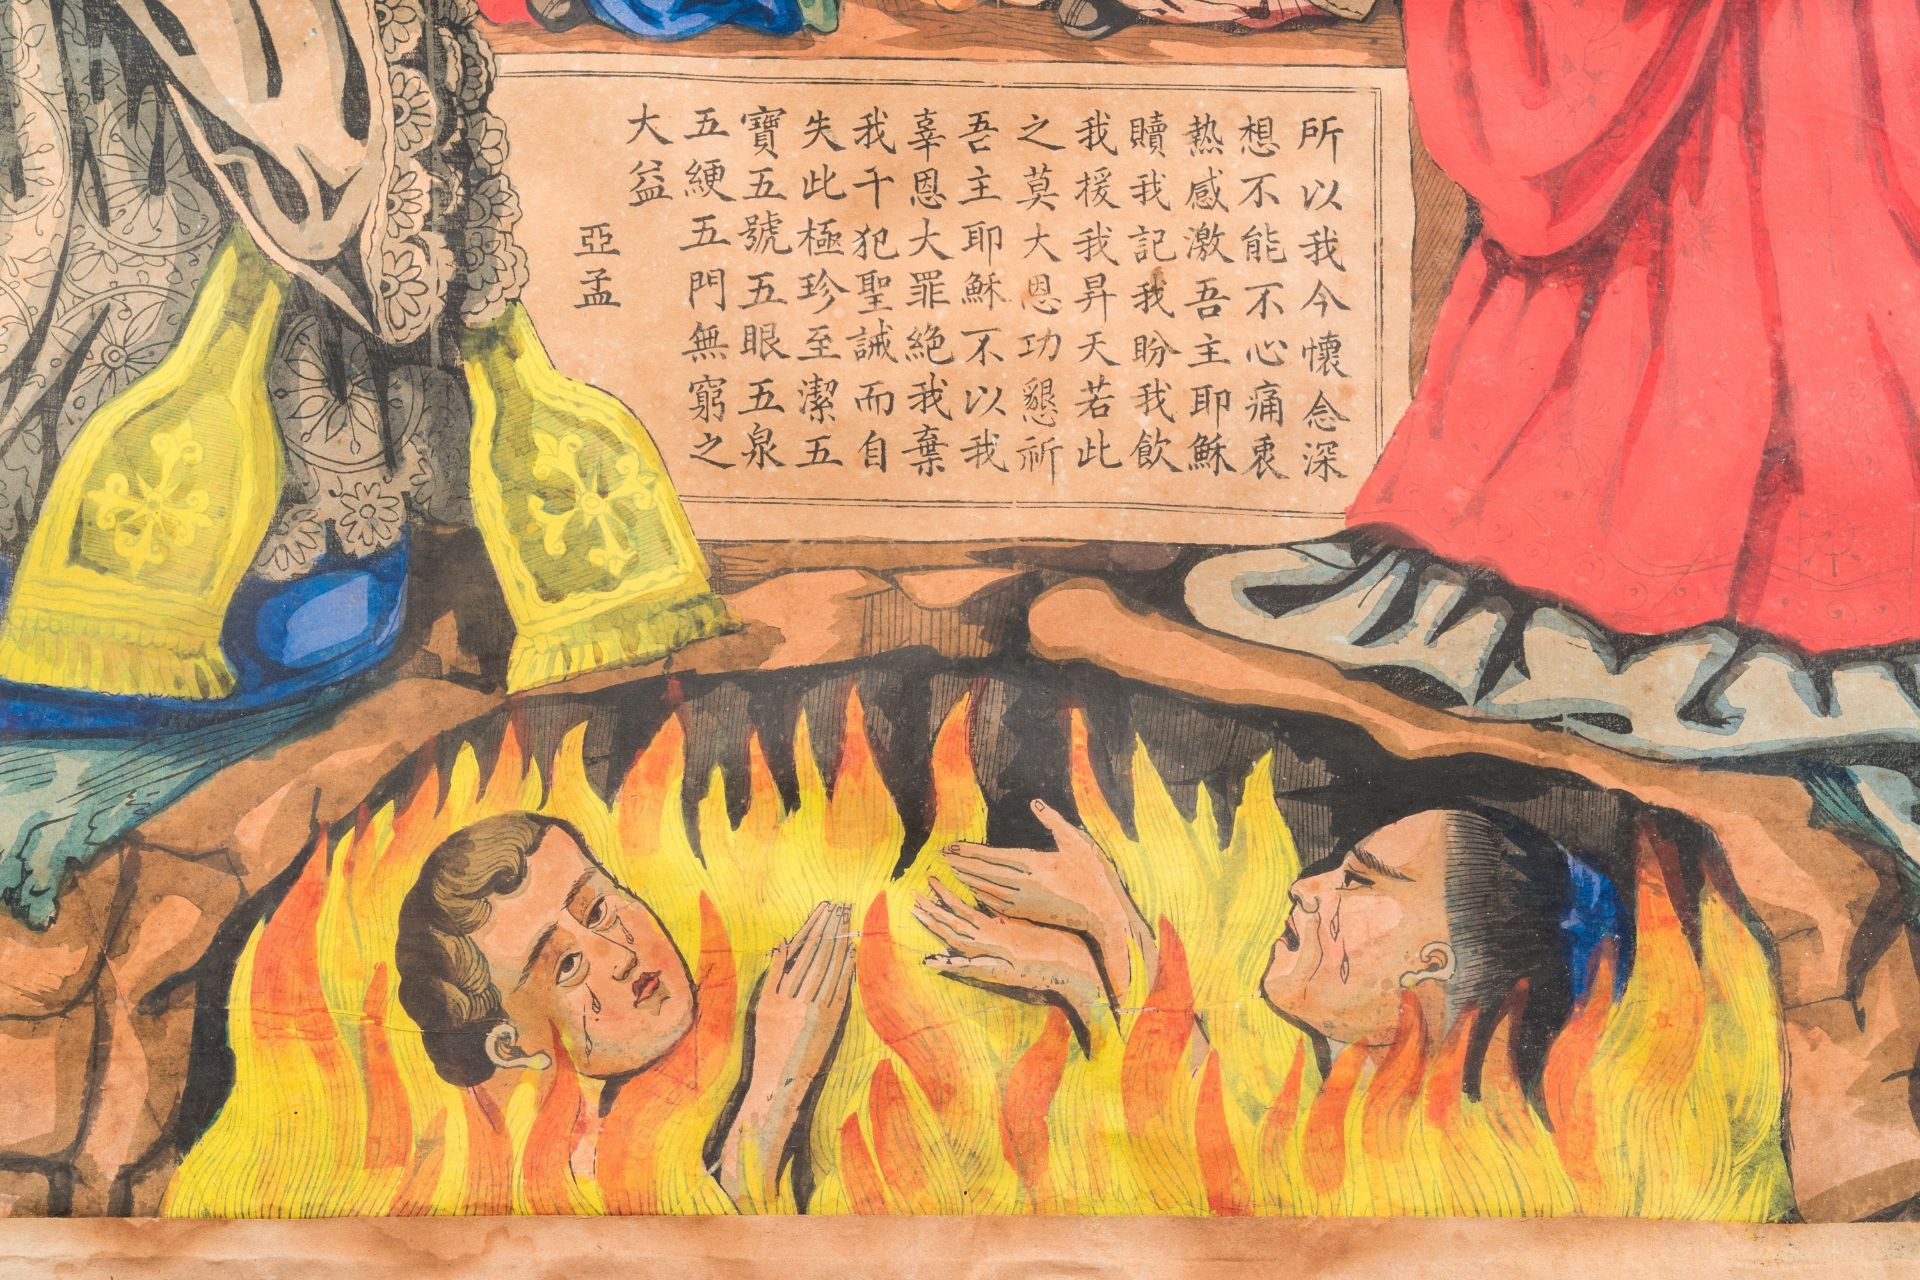 Belgian Catholic missionaries in China: 'The five wounds of Christ', engraving with painted details - Image 6 of 6